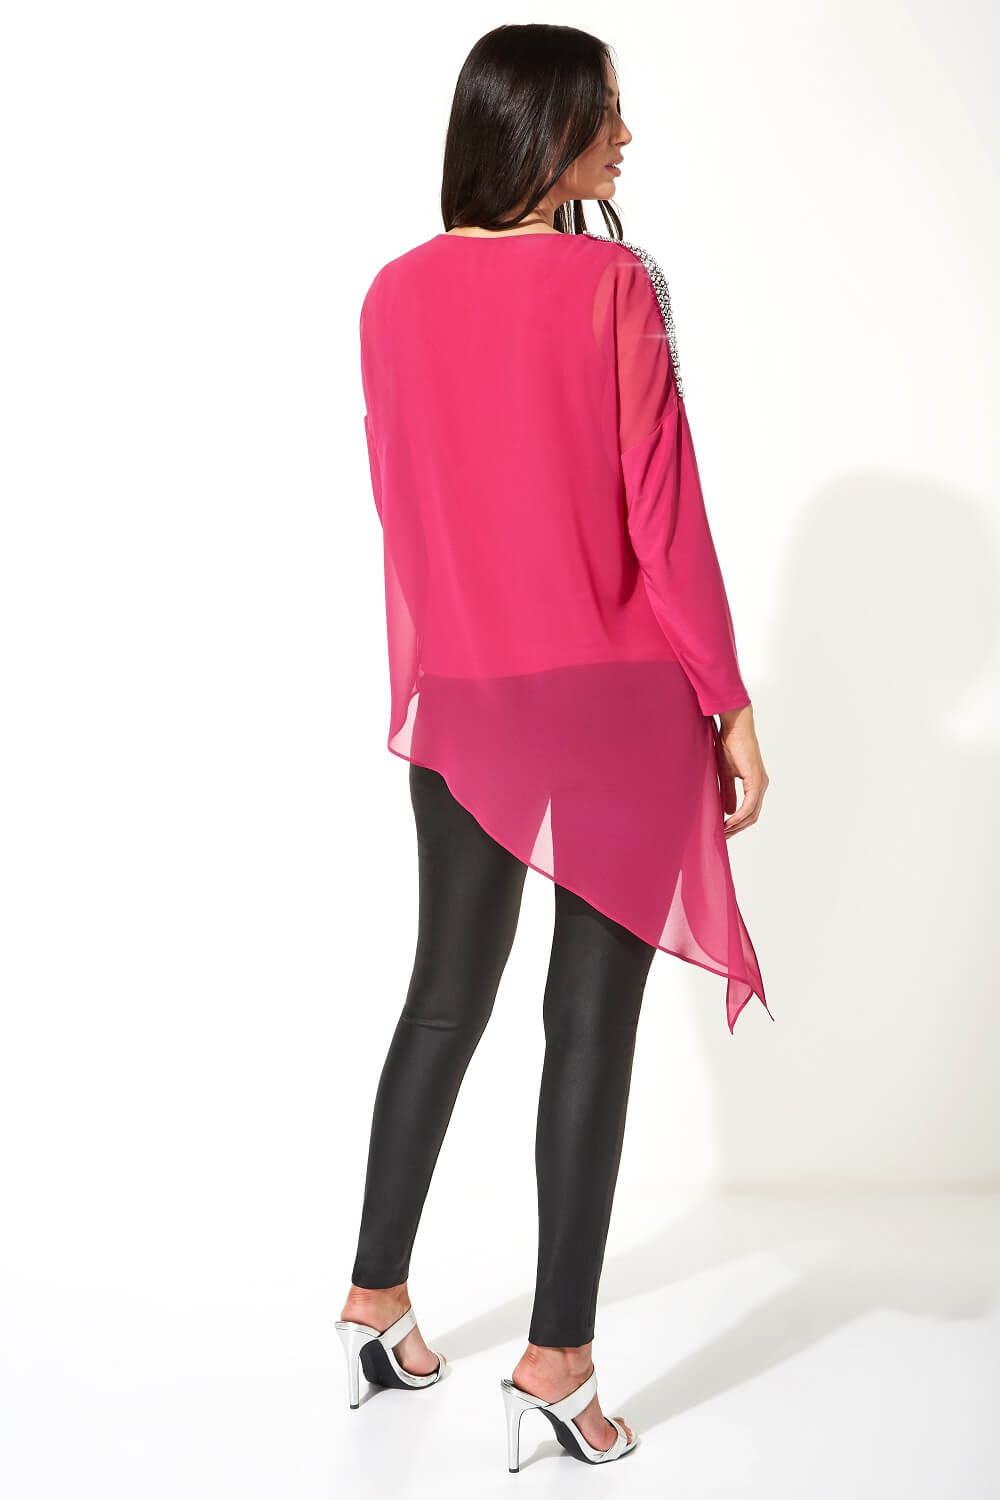 PINK Sparkle Trim Asymmetric Overlay Top, Image 4 of 5